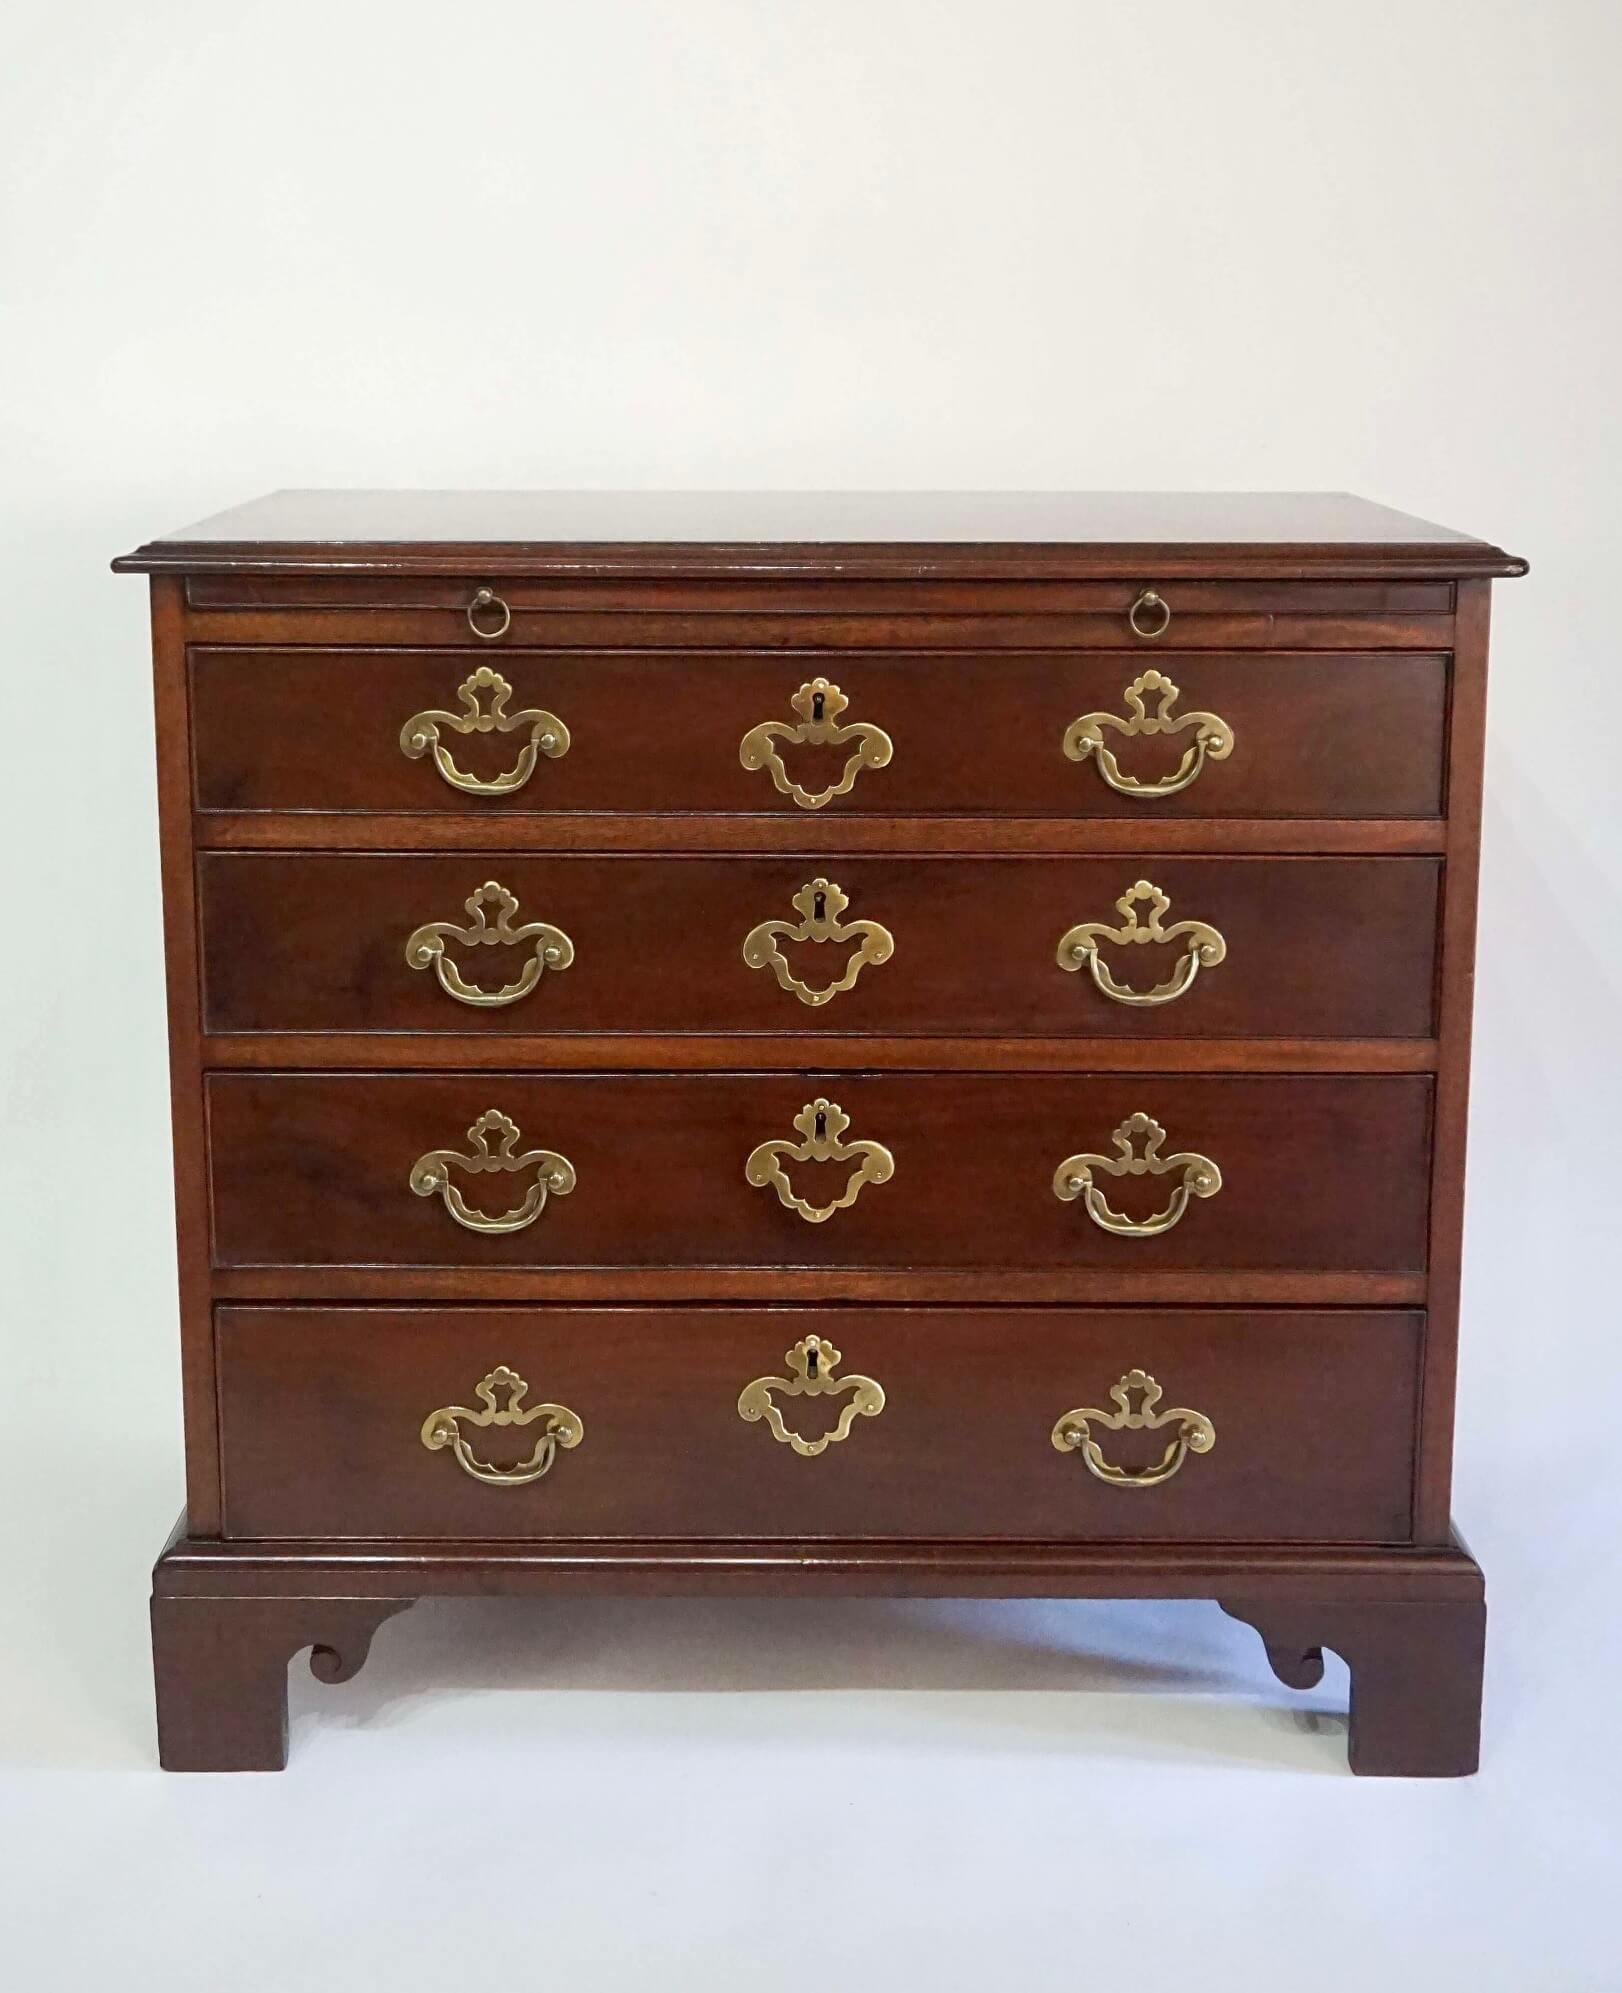 A fine English circa 1760 mahogany bachelor's chest or petite commode having single solid board top with molded edge atop pullout brushing slide over four drawers with original brass hardware on scroll-carved bracket feet.